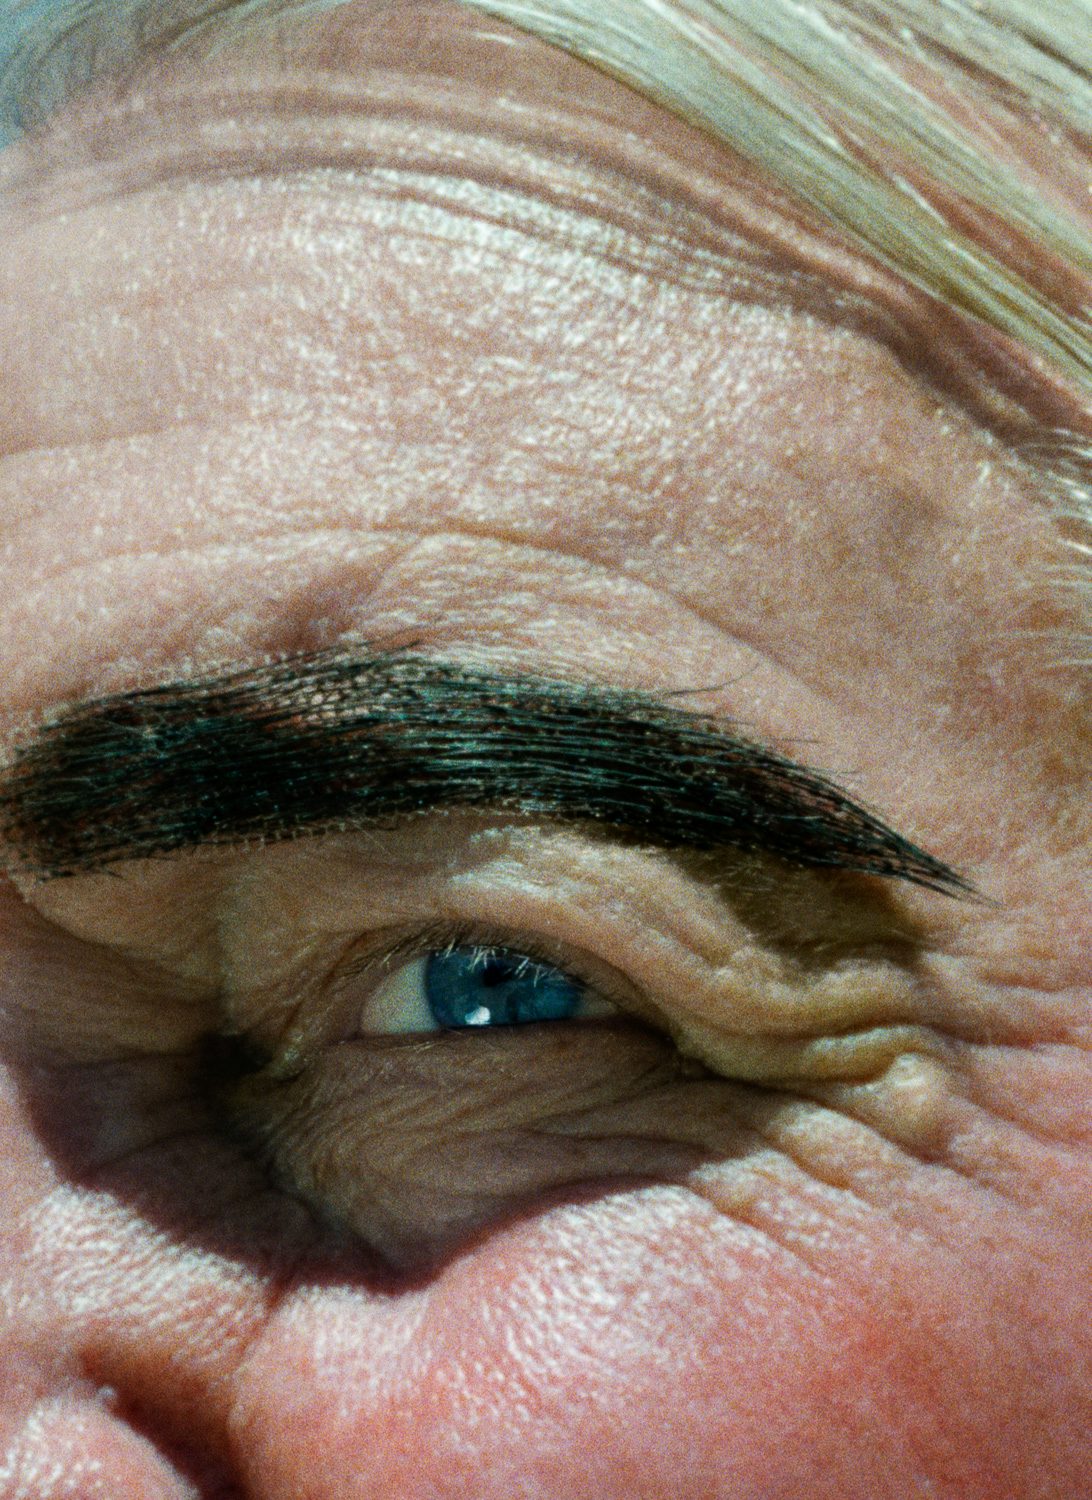 Image by Alex Prager shows a close crop of a portrait photograph of someone's eye area, who appears to be wearing dark stick-on eyebrows